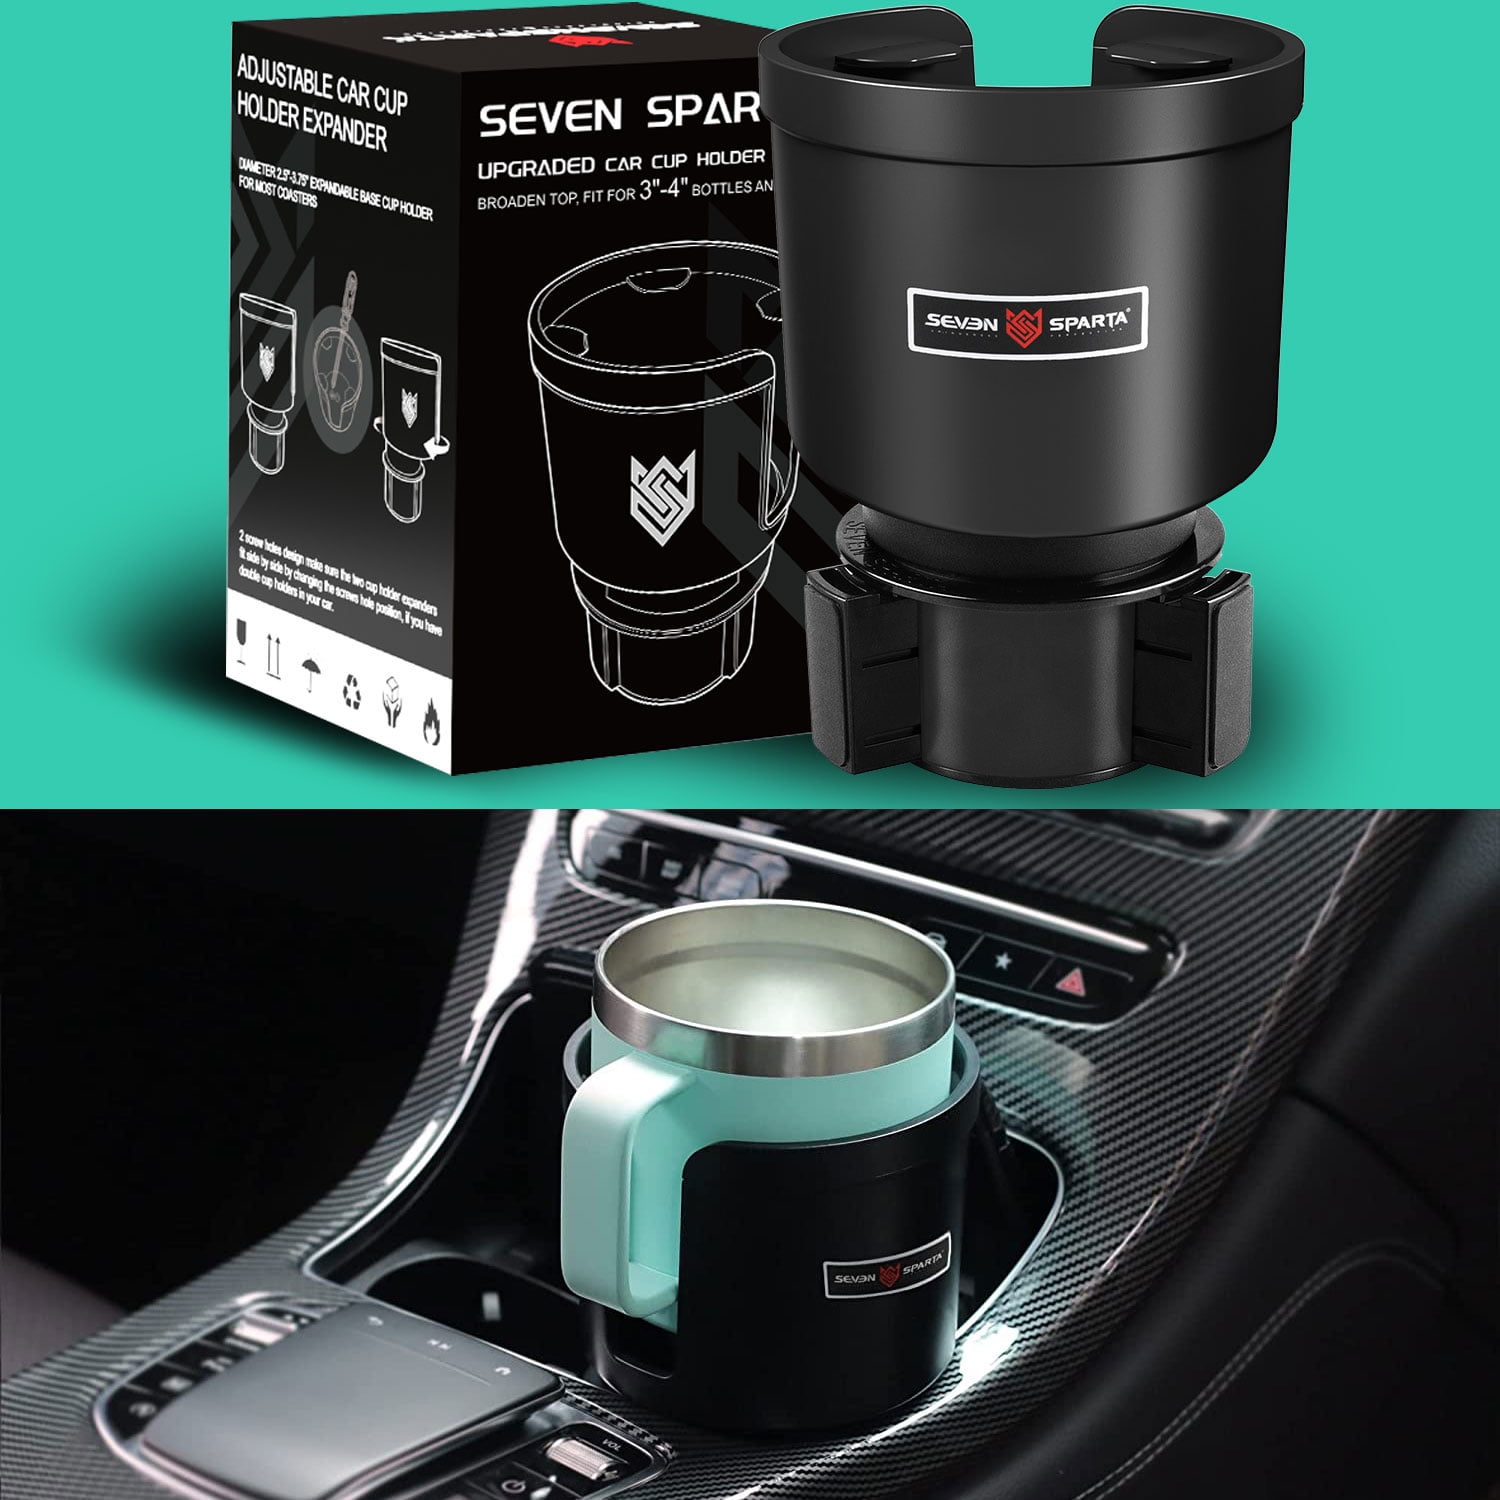 Seven Sparta Car Cup Holder Expander Adapter Insert with Offset